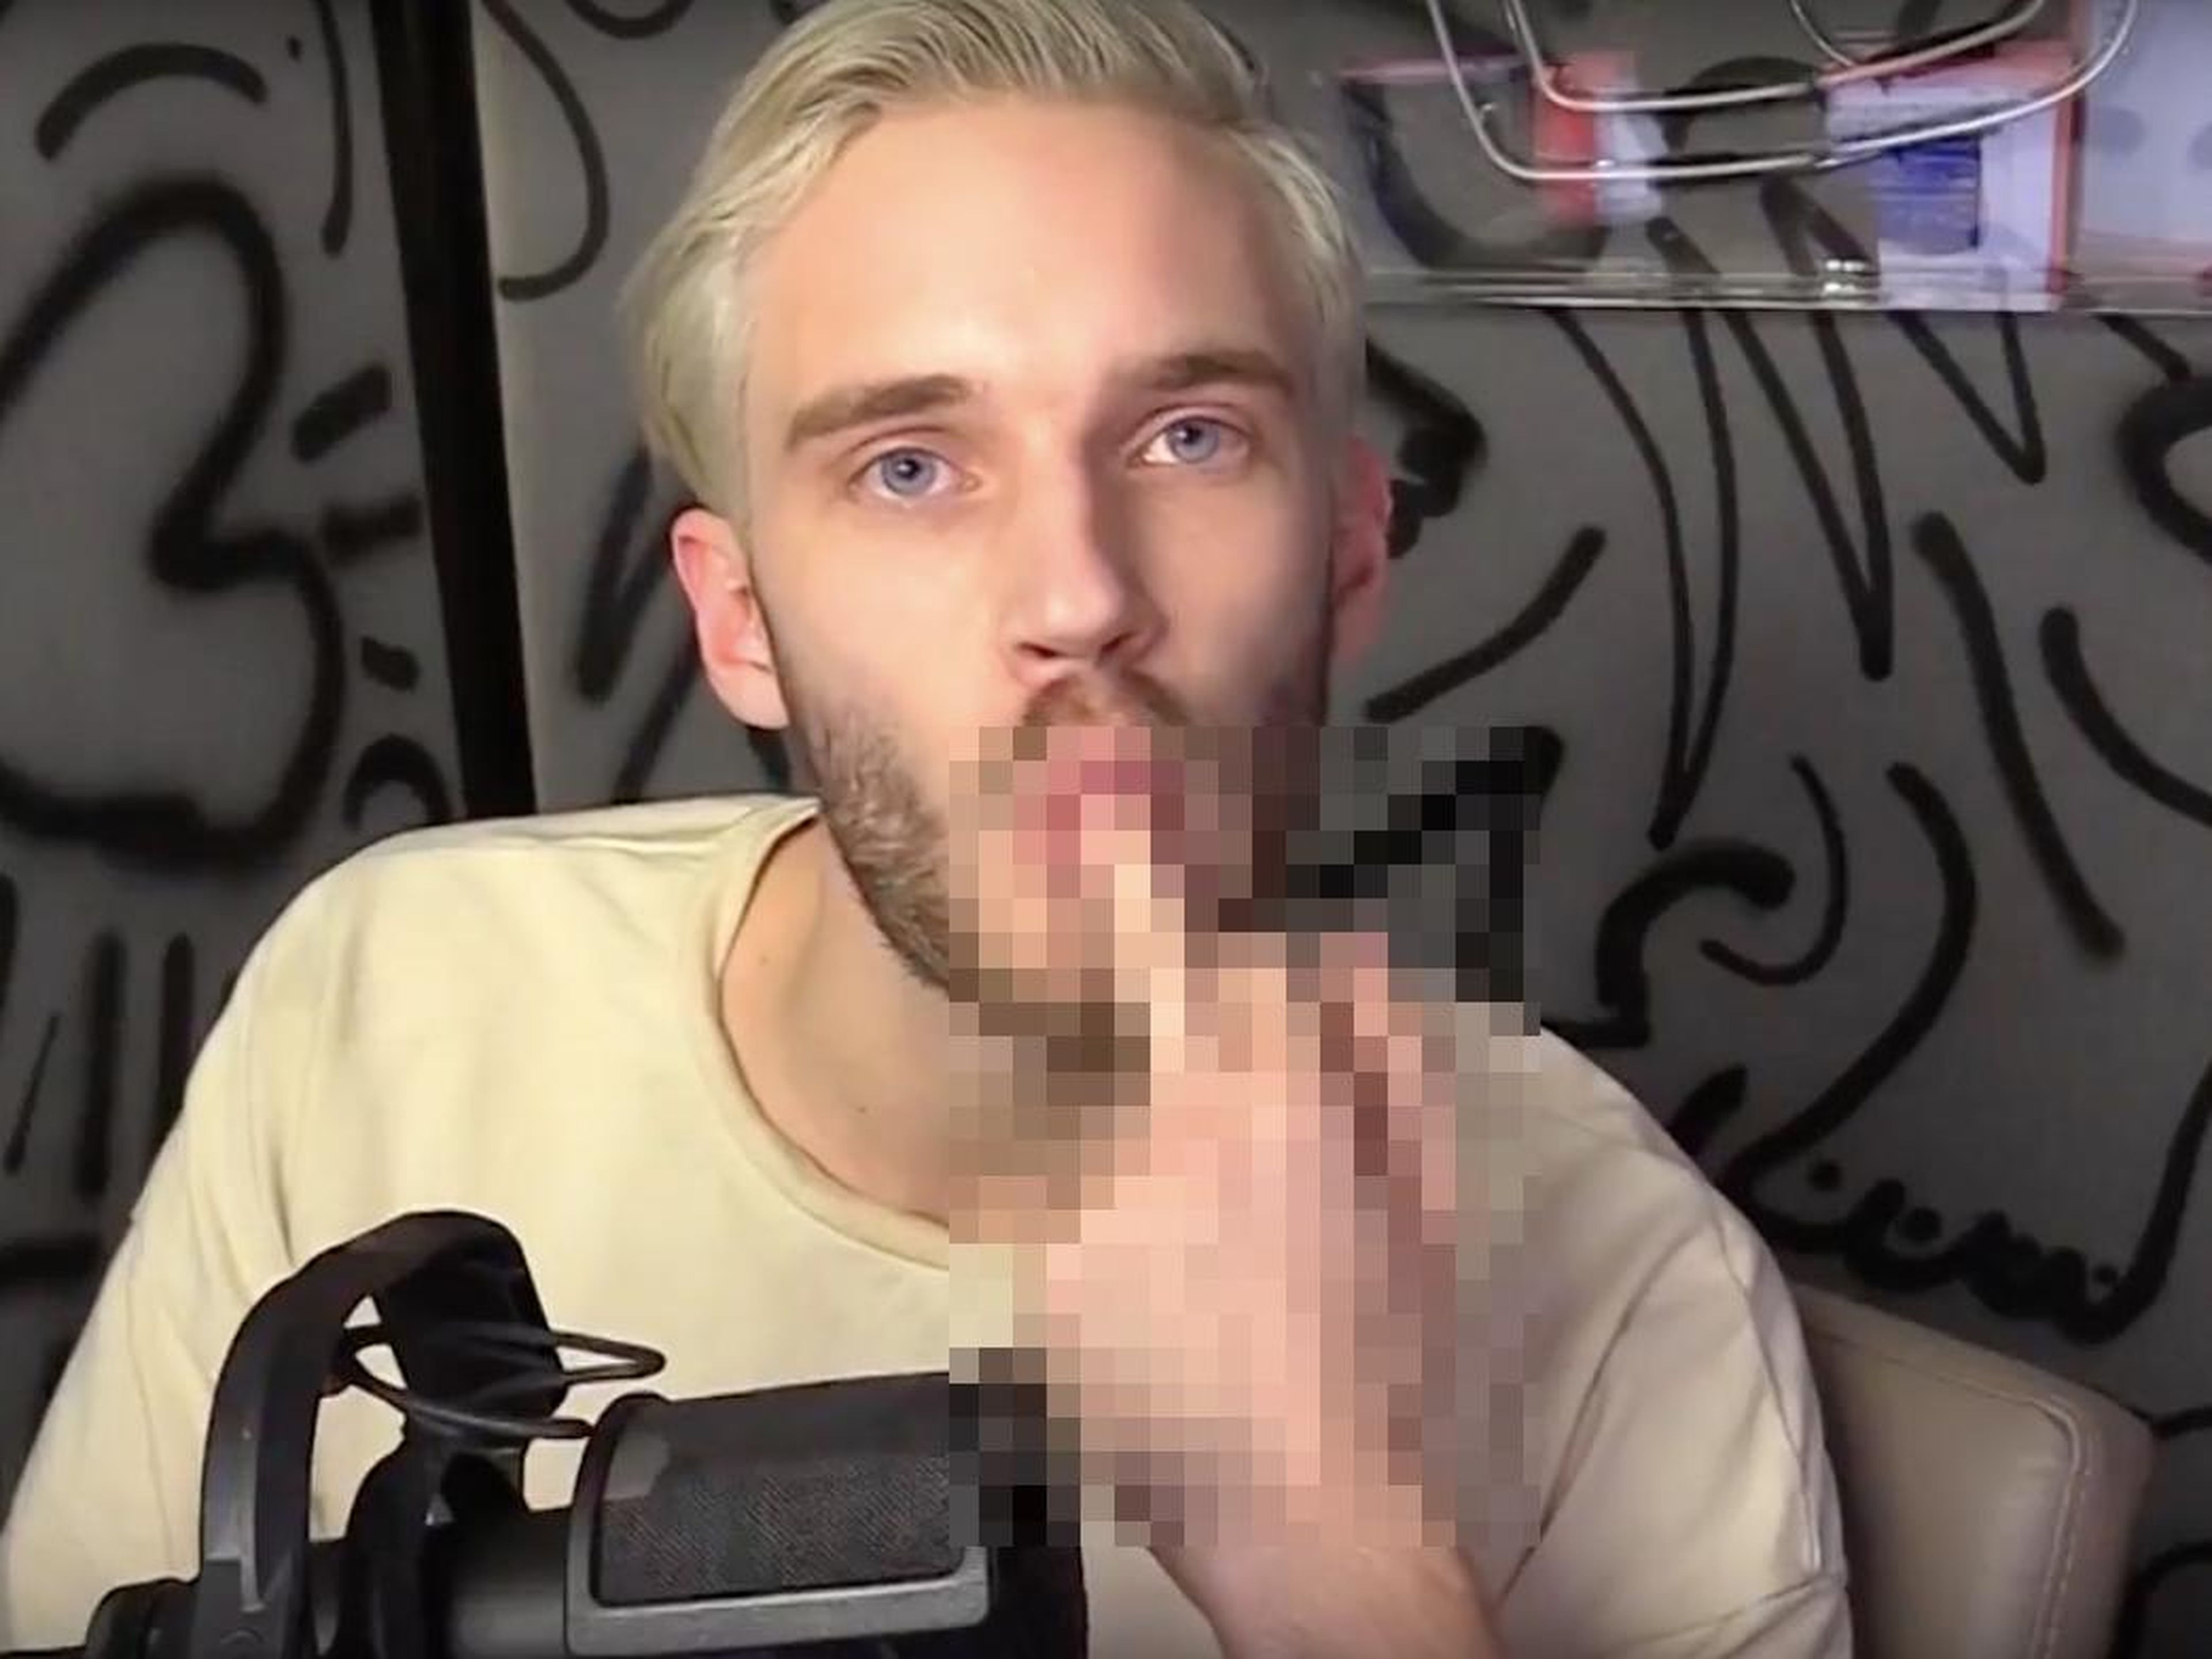 After being dropped by Disney and YouTube, Kjellberg released a video calling the backlash against his behavior "an attack by the media to try and discredit me." He flipped off the camera, and invited the media to "try again